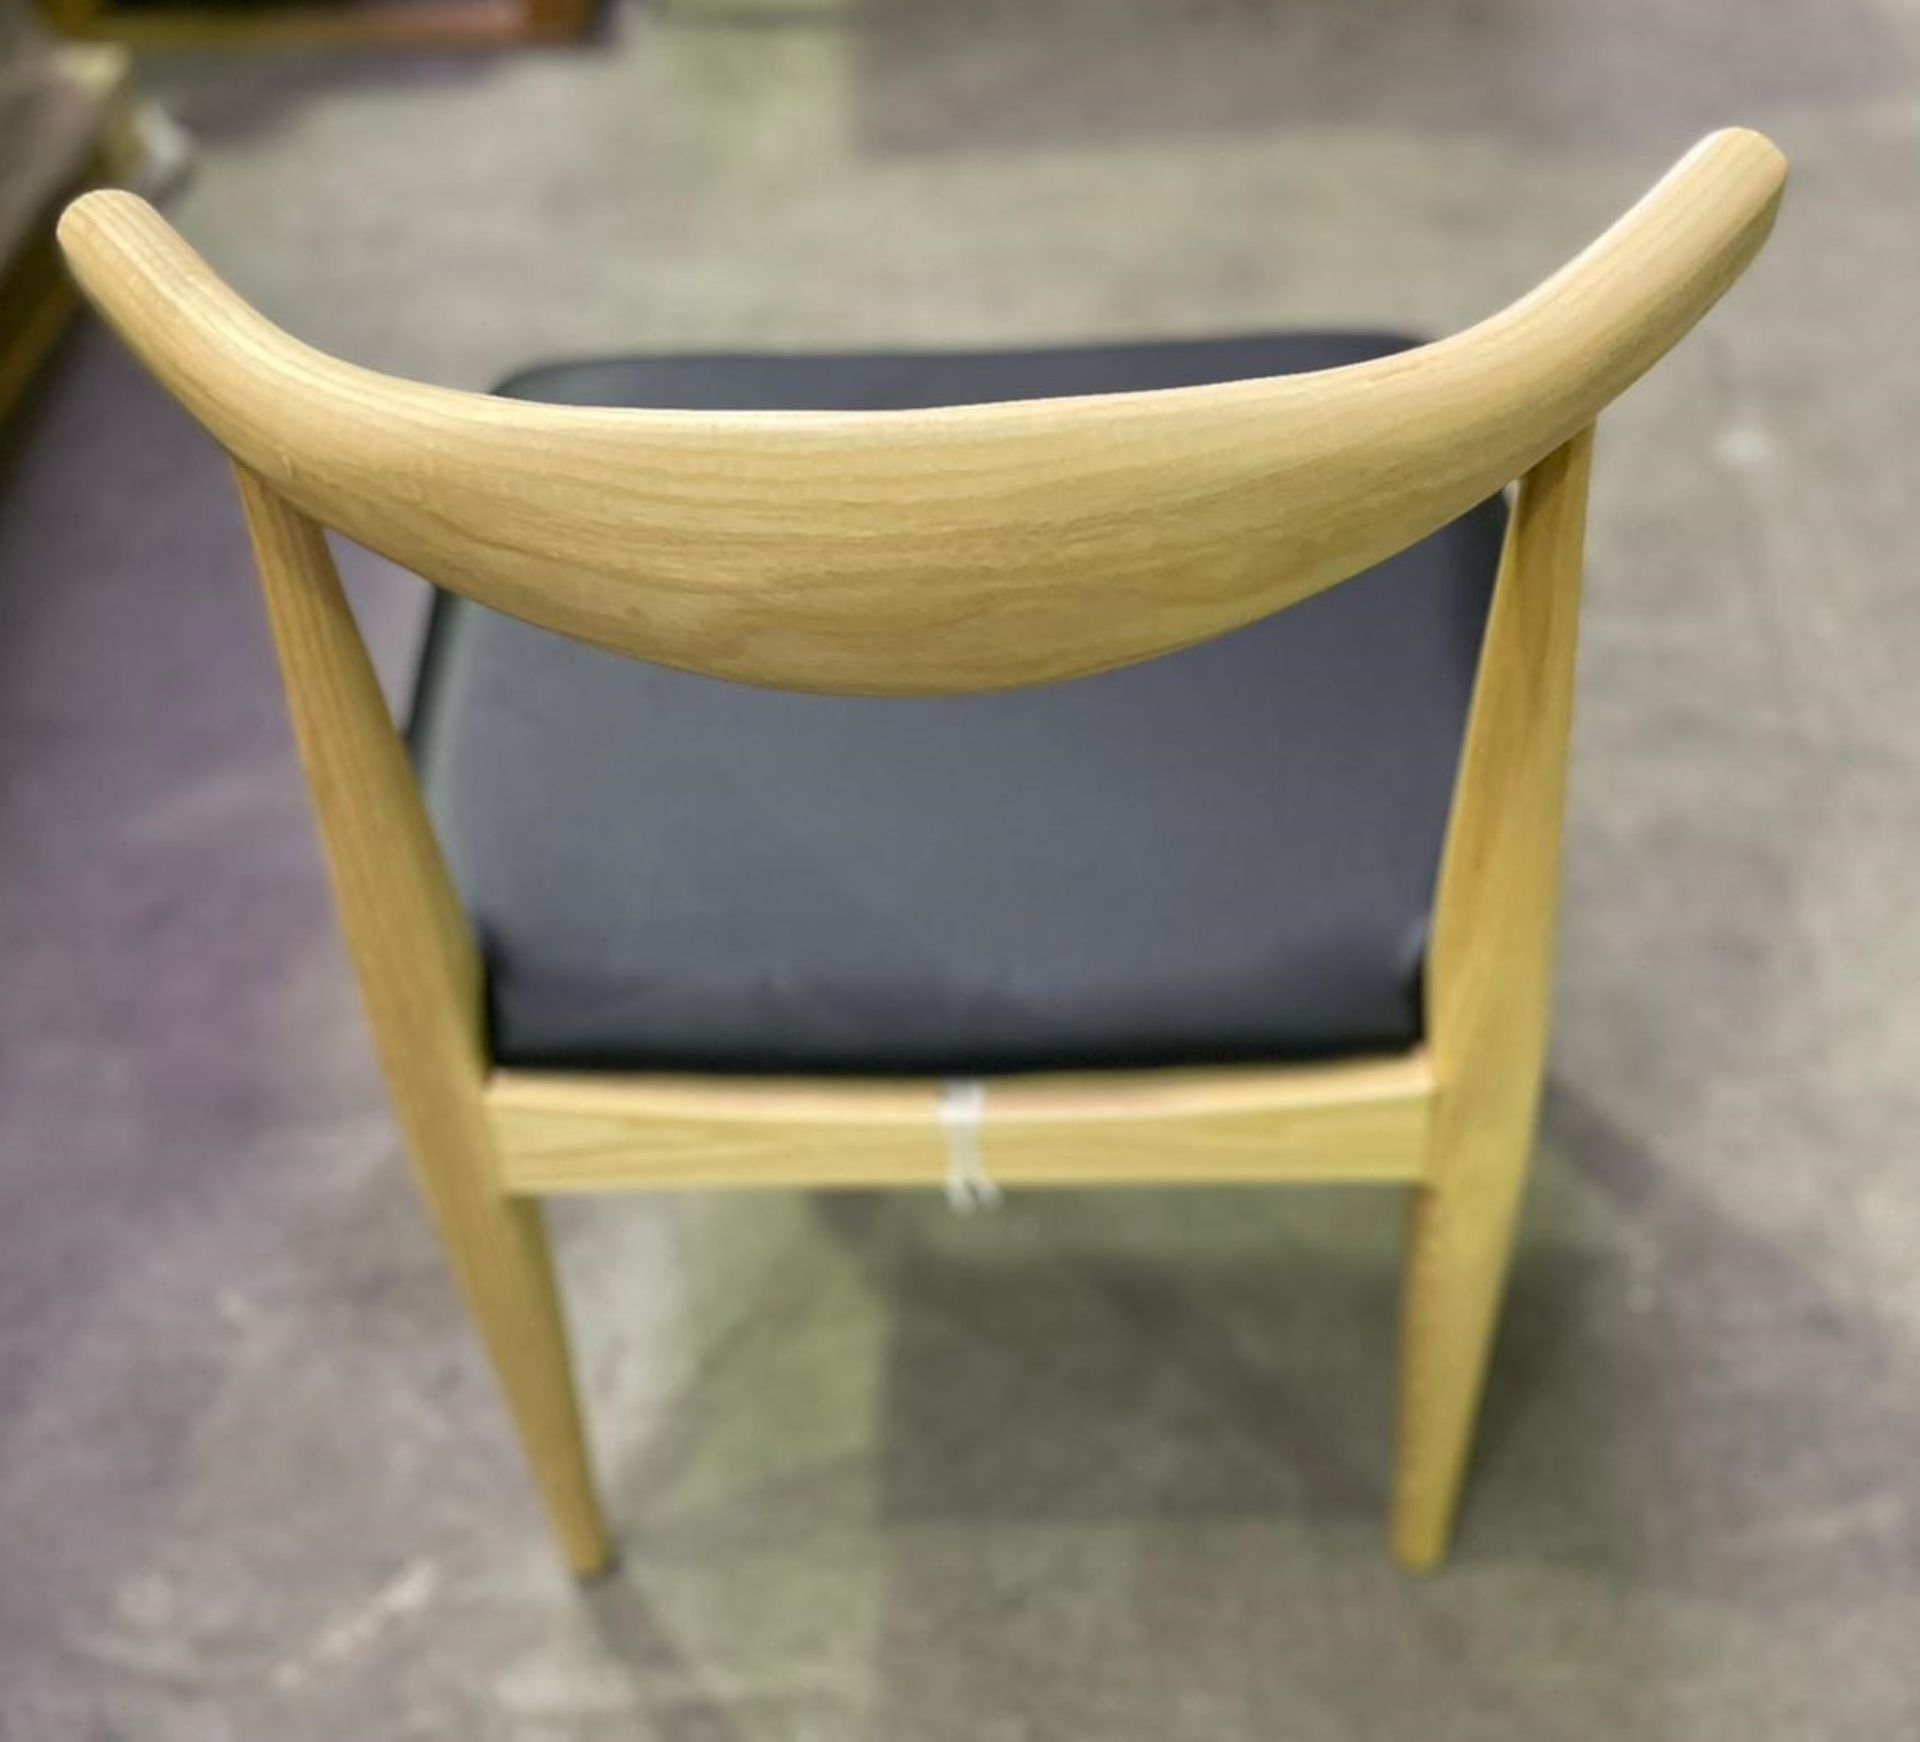 4 x Hans Wegner Inspired Elbow Chair - Solid Wood With Light Stain Ash Finish And Black Seat Pad - - Image 5 of 7